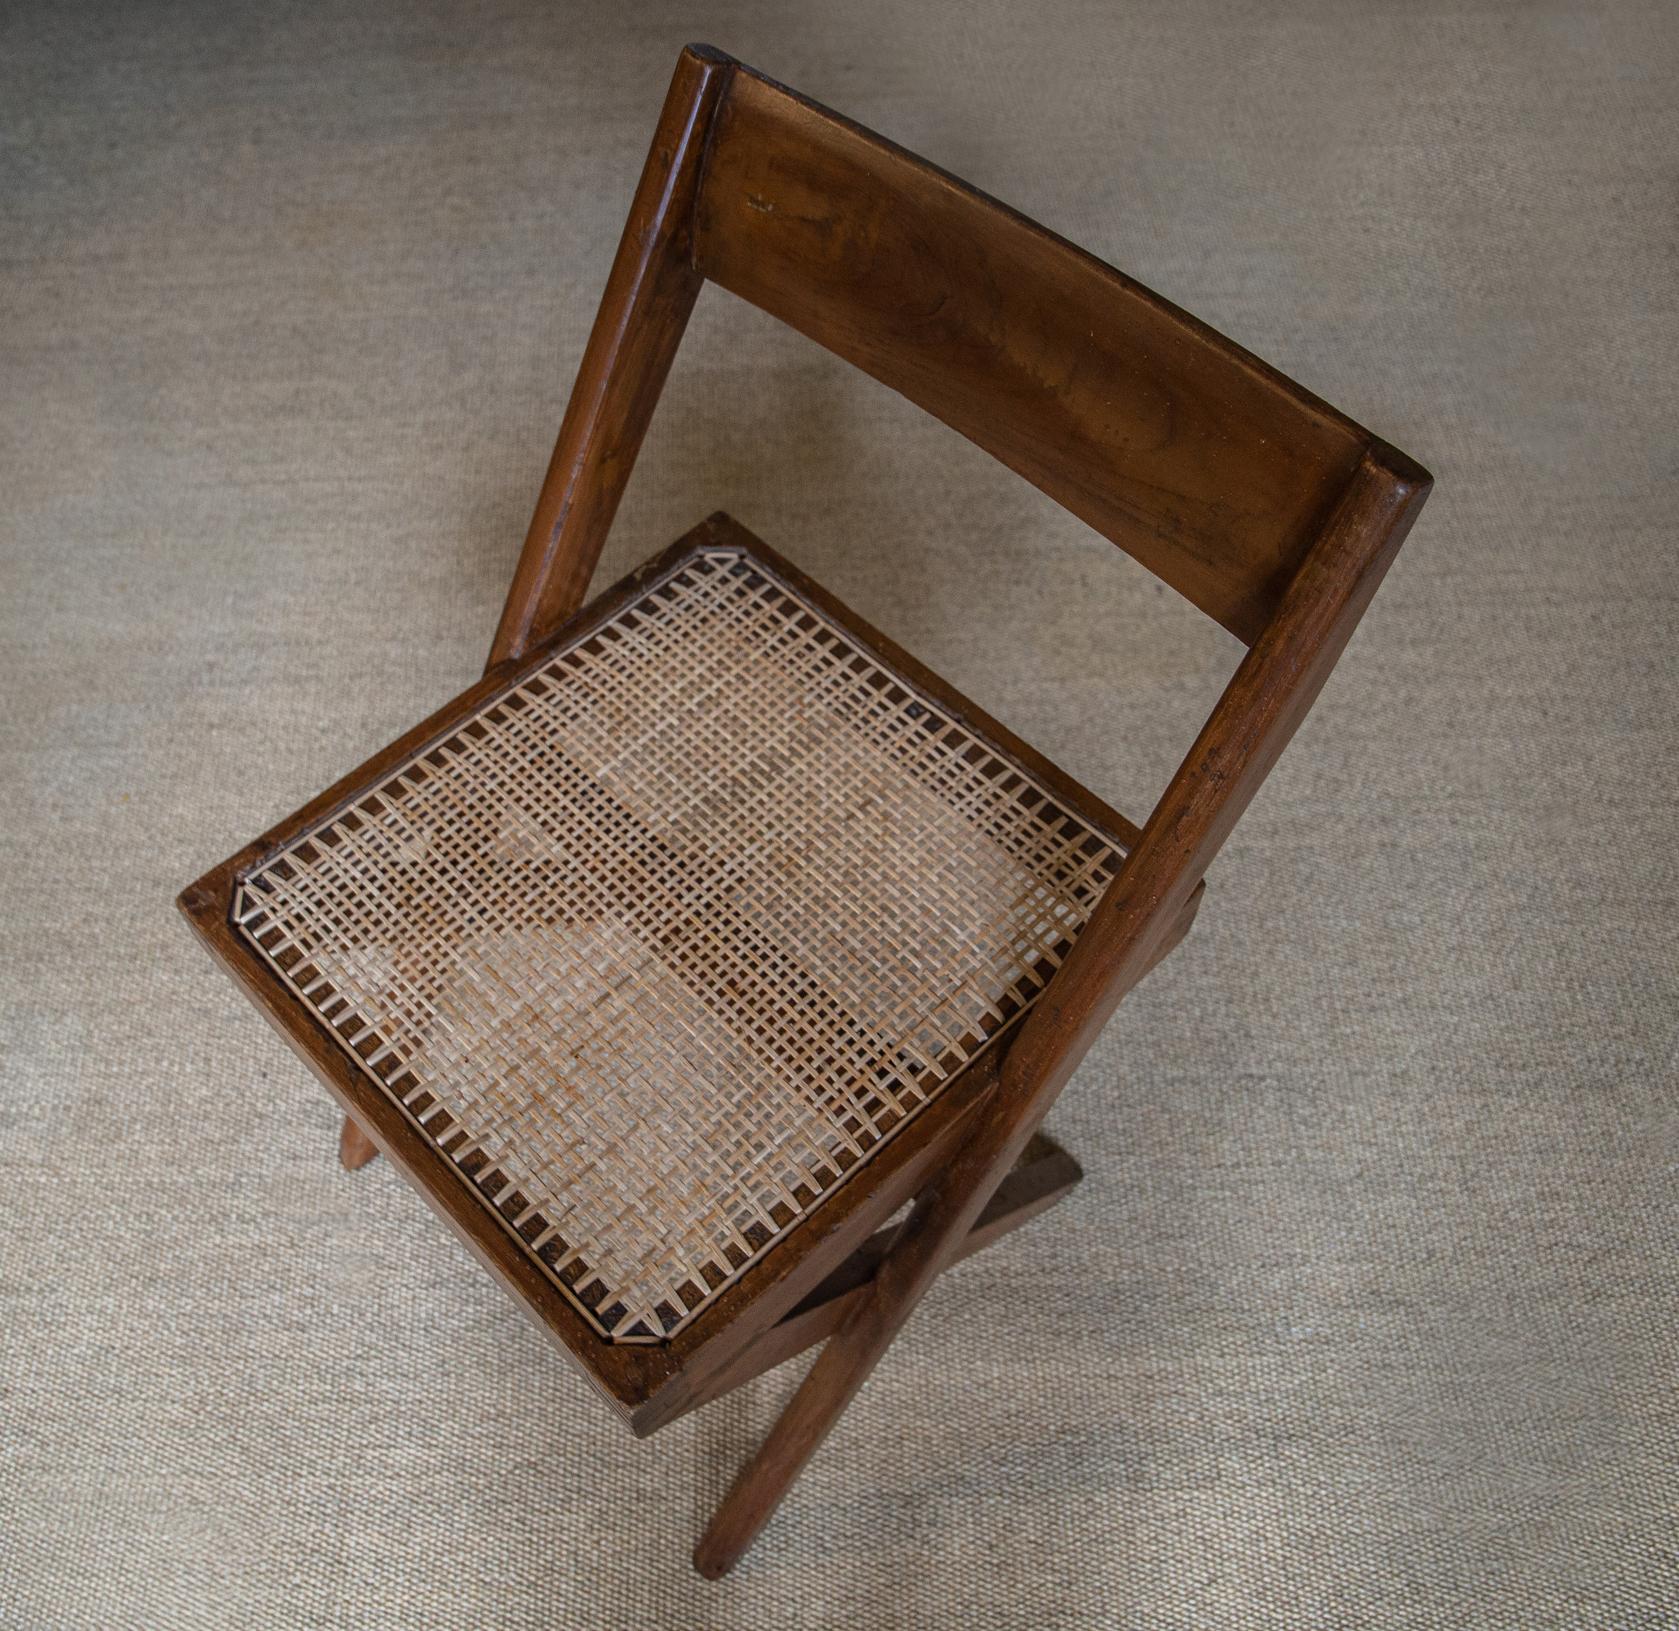 Four X Frame Chairs by Pierre Jeanneret & Eulie Chowdhury, Chandigarh India 1959 For Sale 4